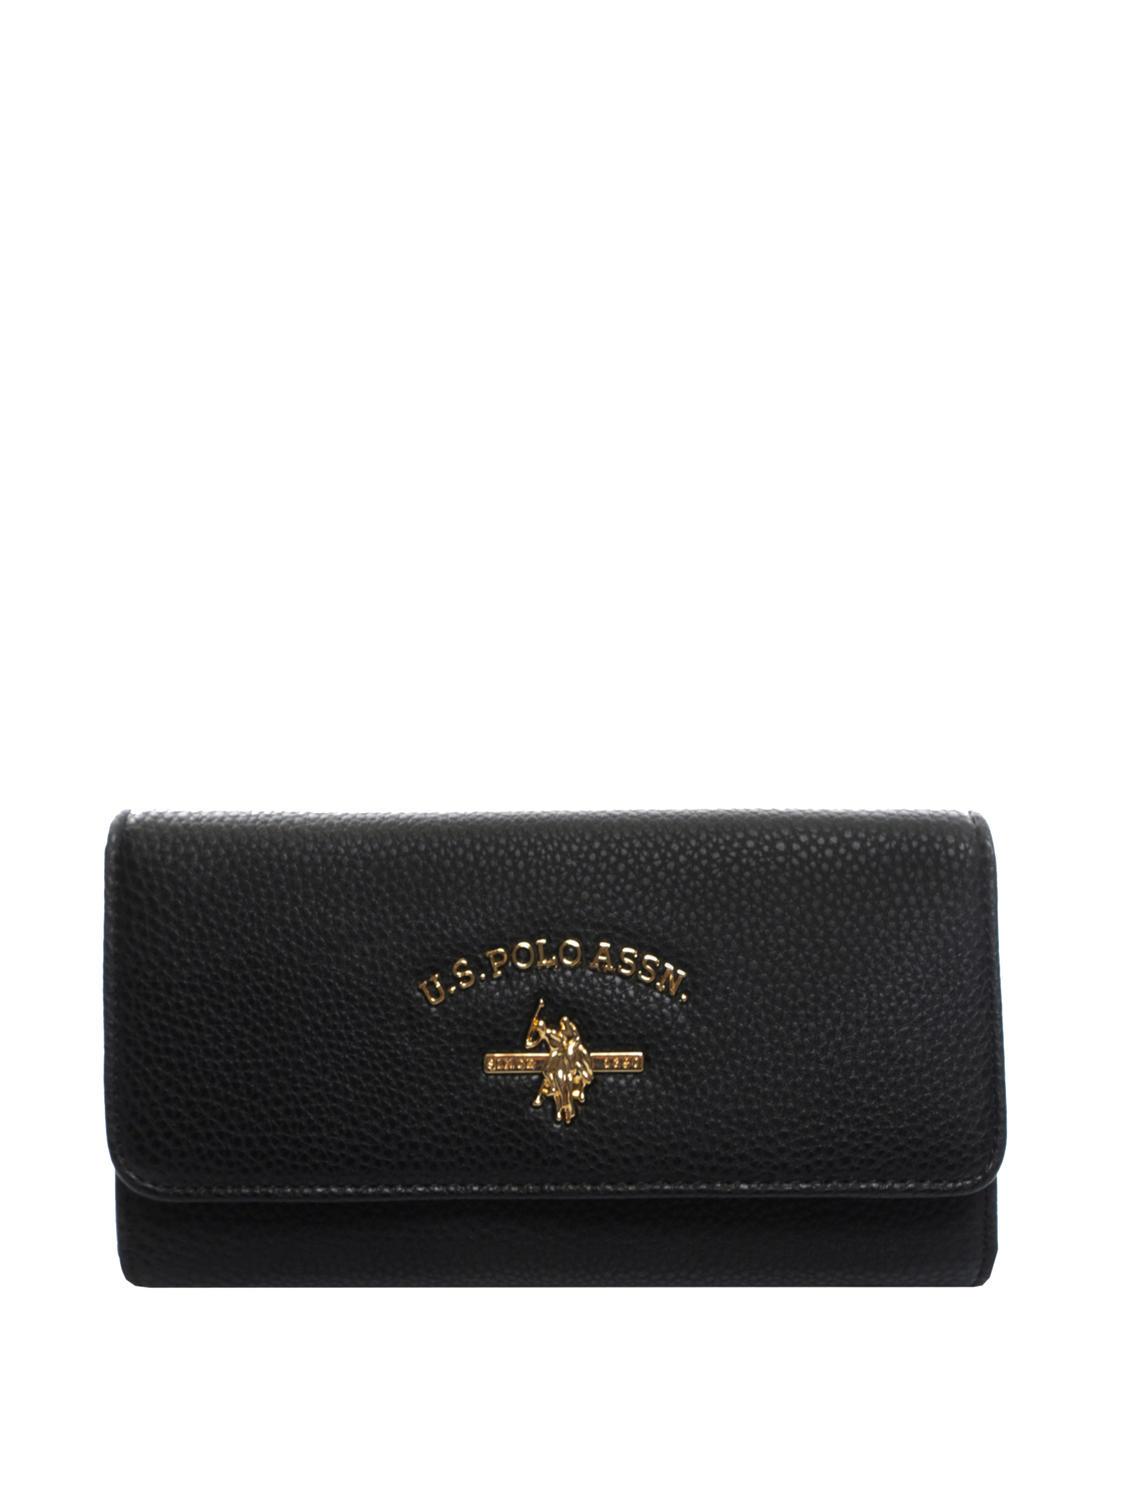 U.s. Polo Assn. Stanford Large Wallet Black - Buy At Outlet Prices!